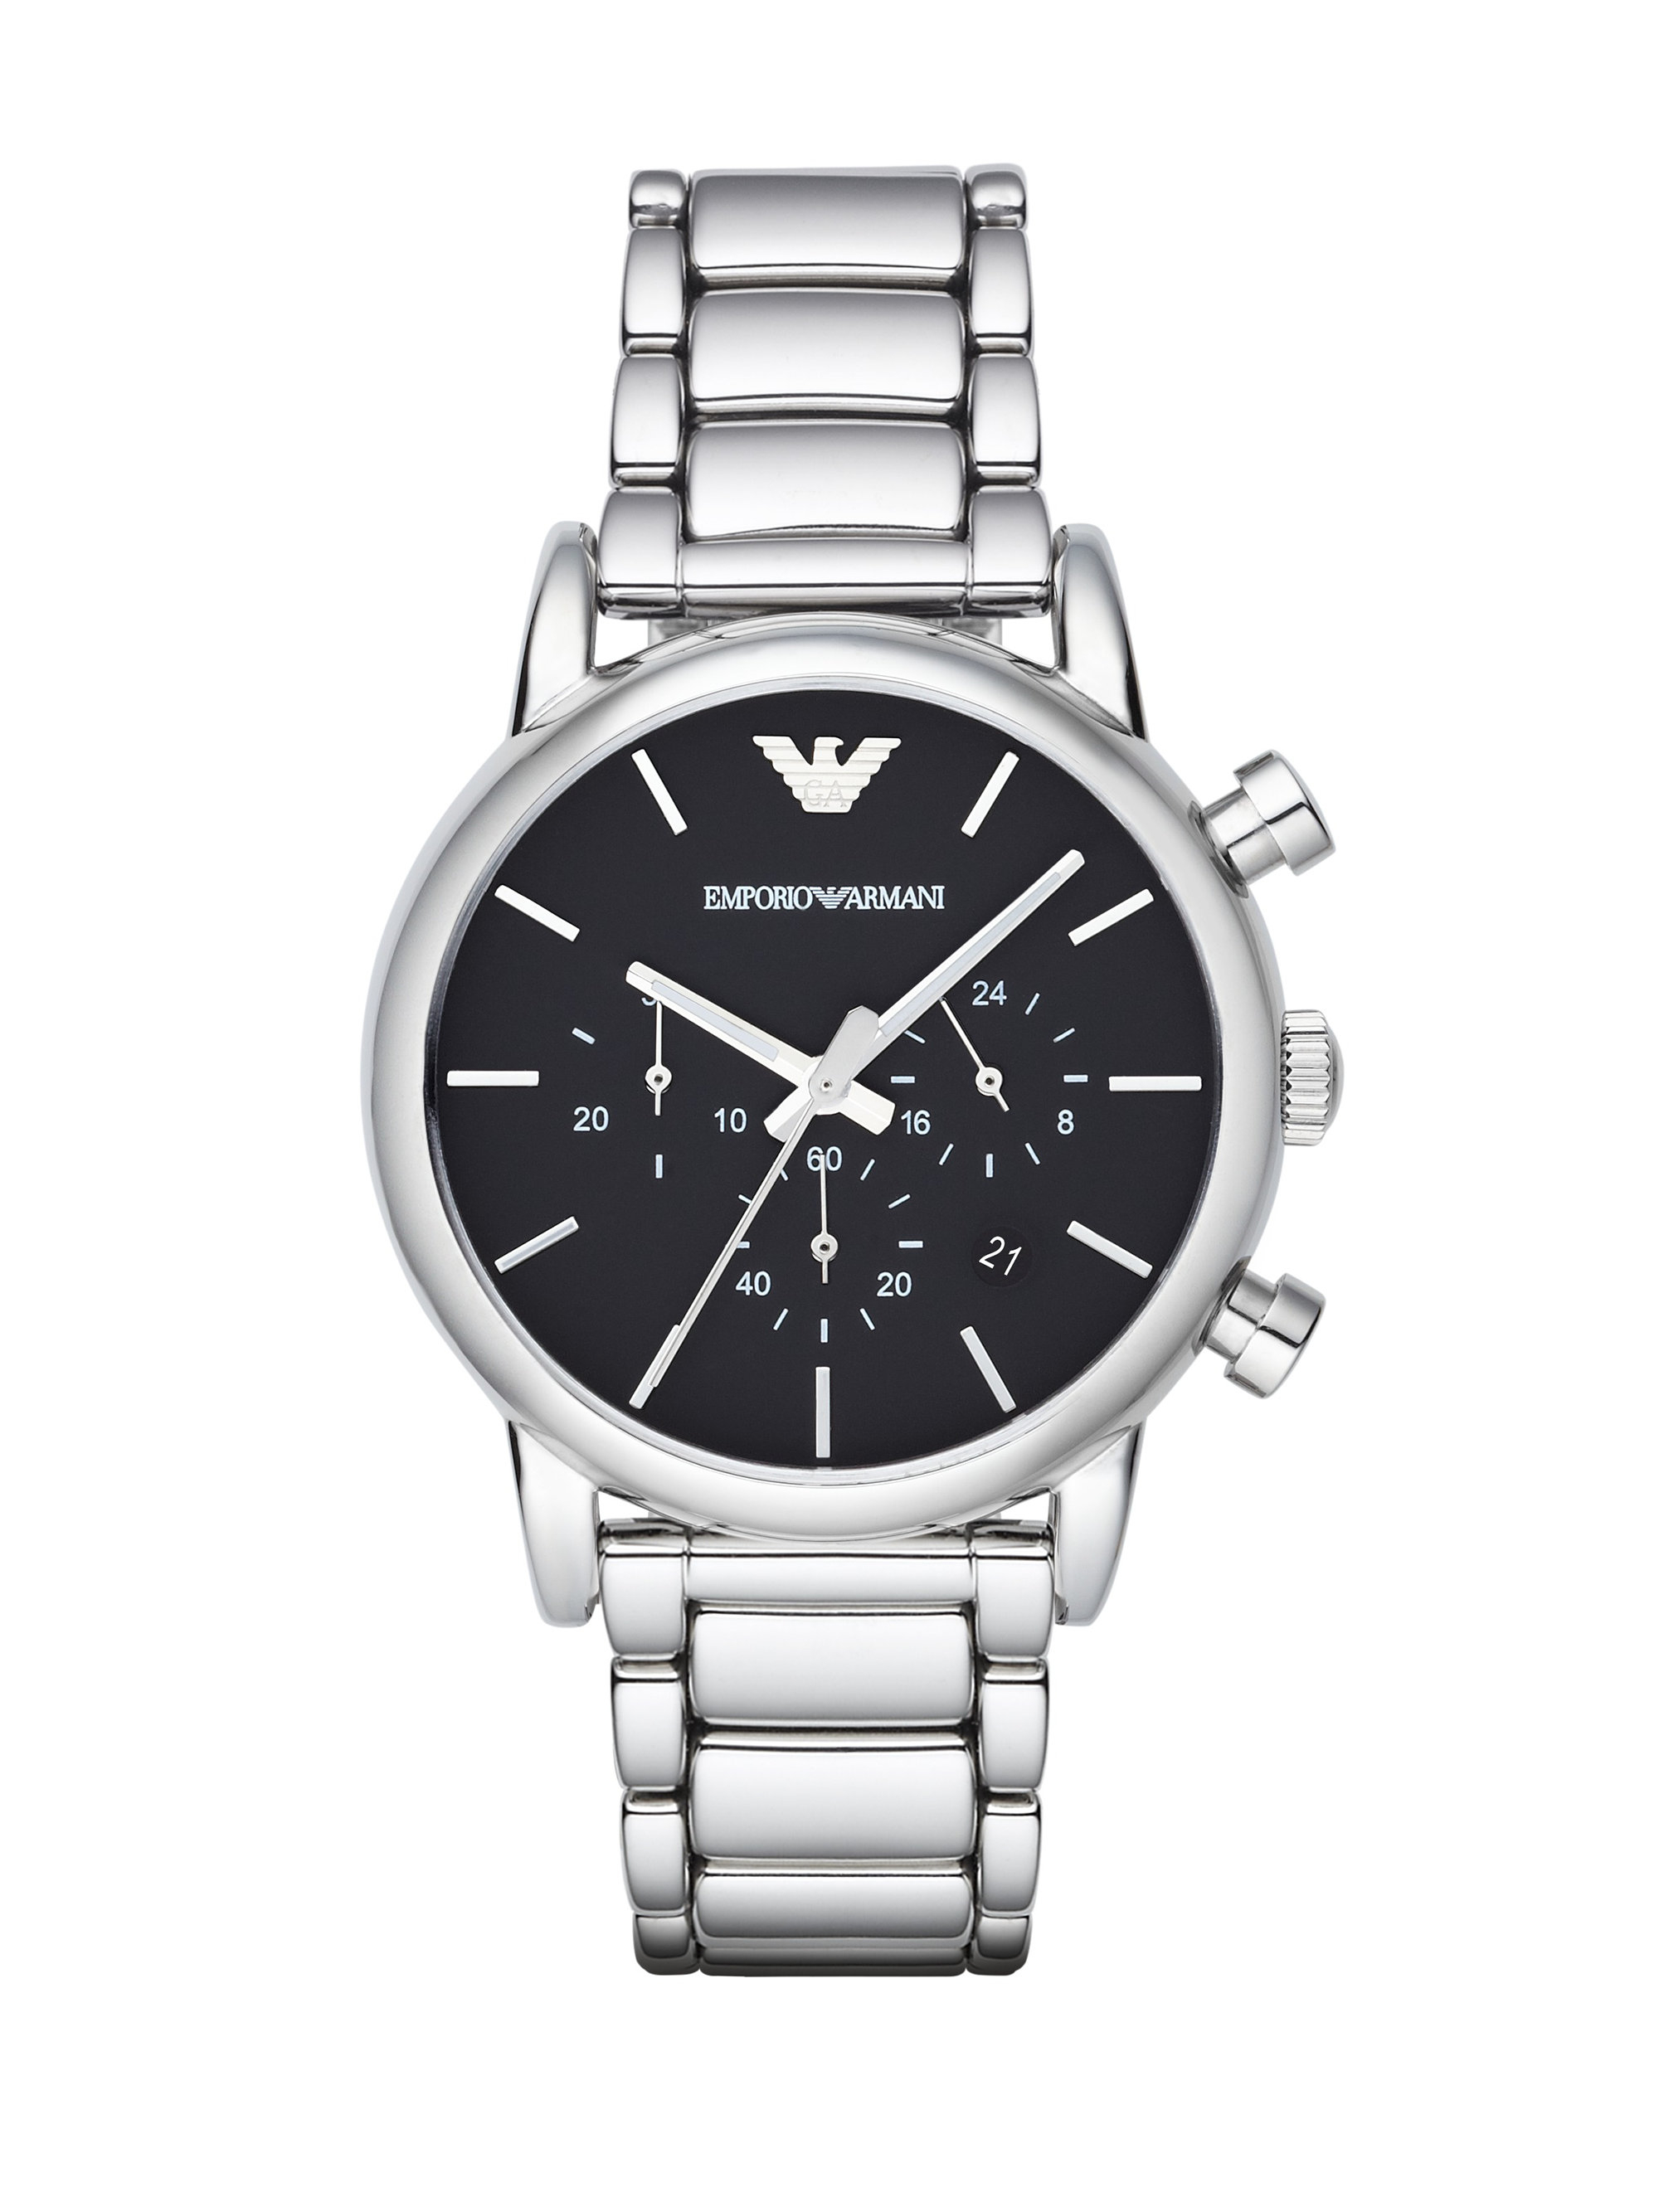 Lyst - Emporio Armani Round Stainless Steel Chronograph Watch in Gray